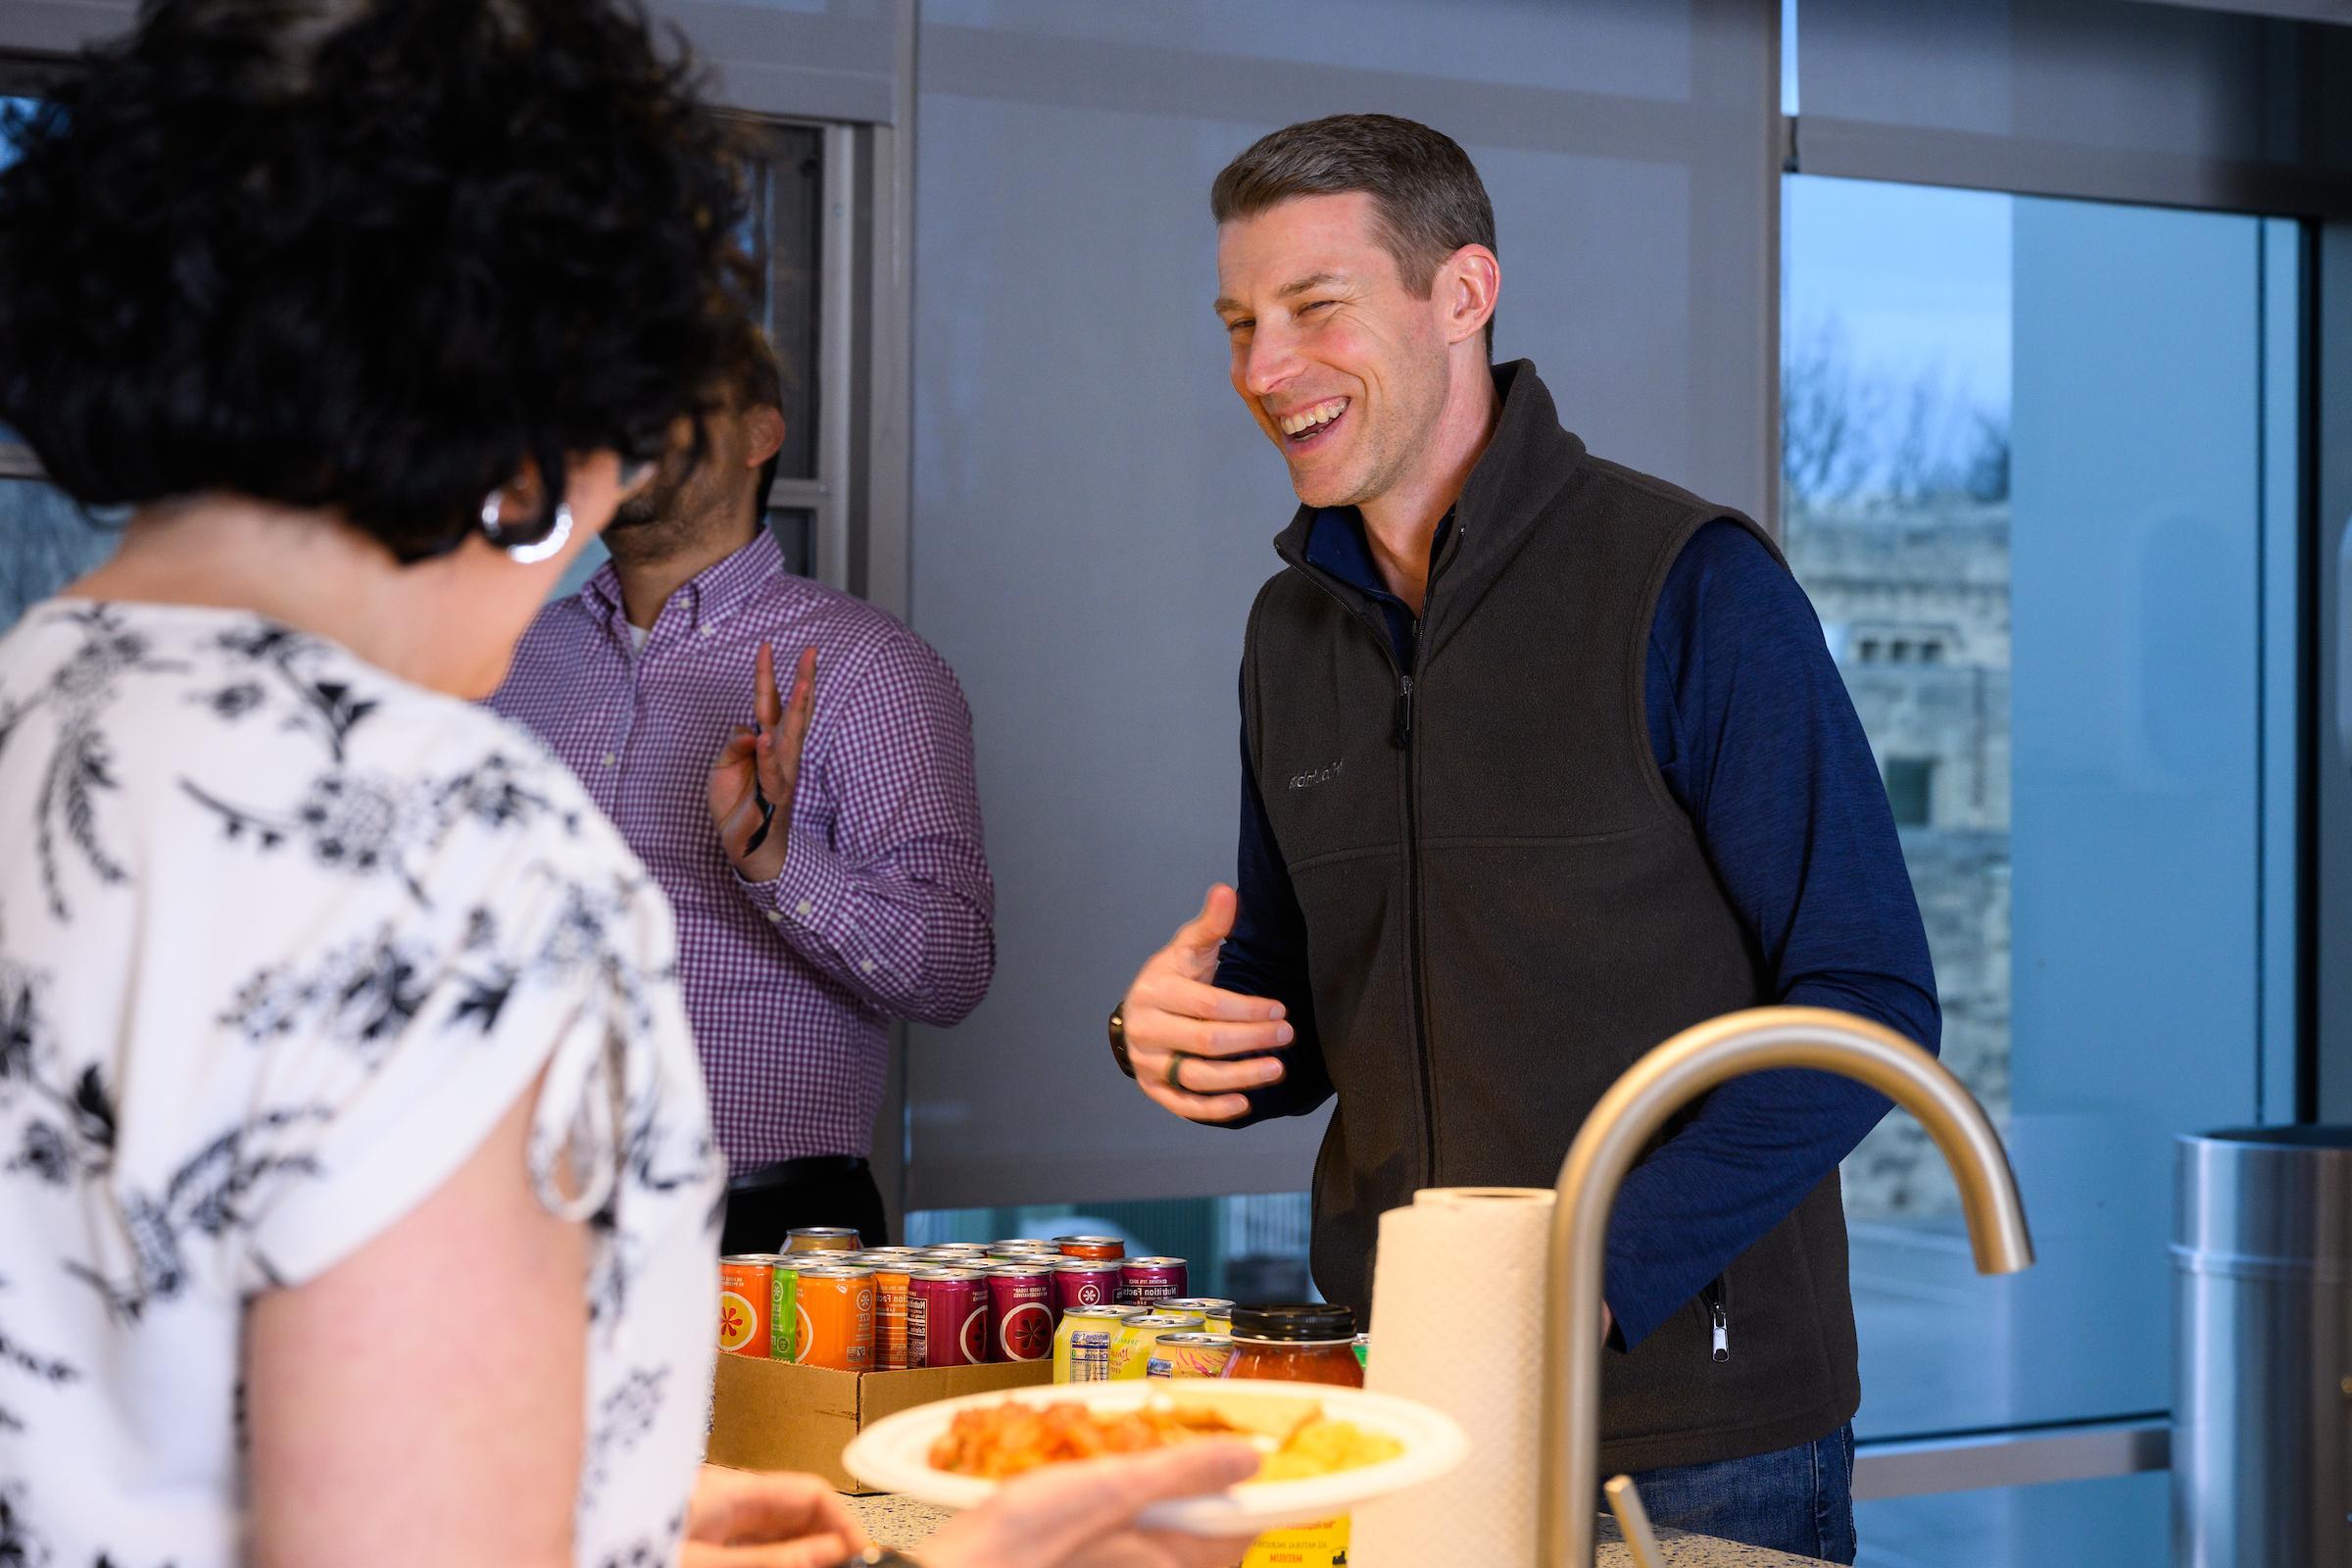 A faculty-in-residence talks to others in a kitchen